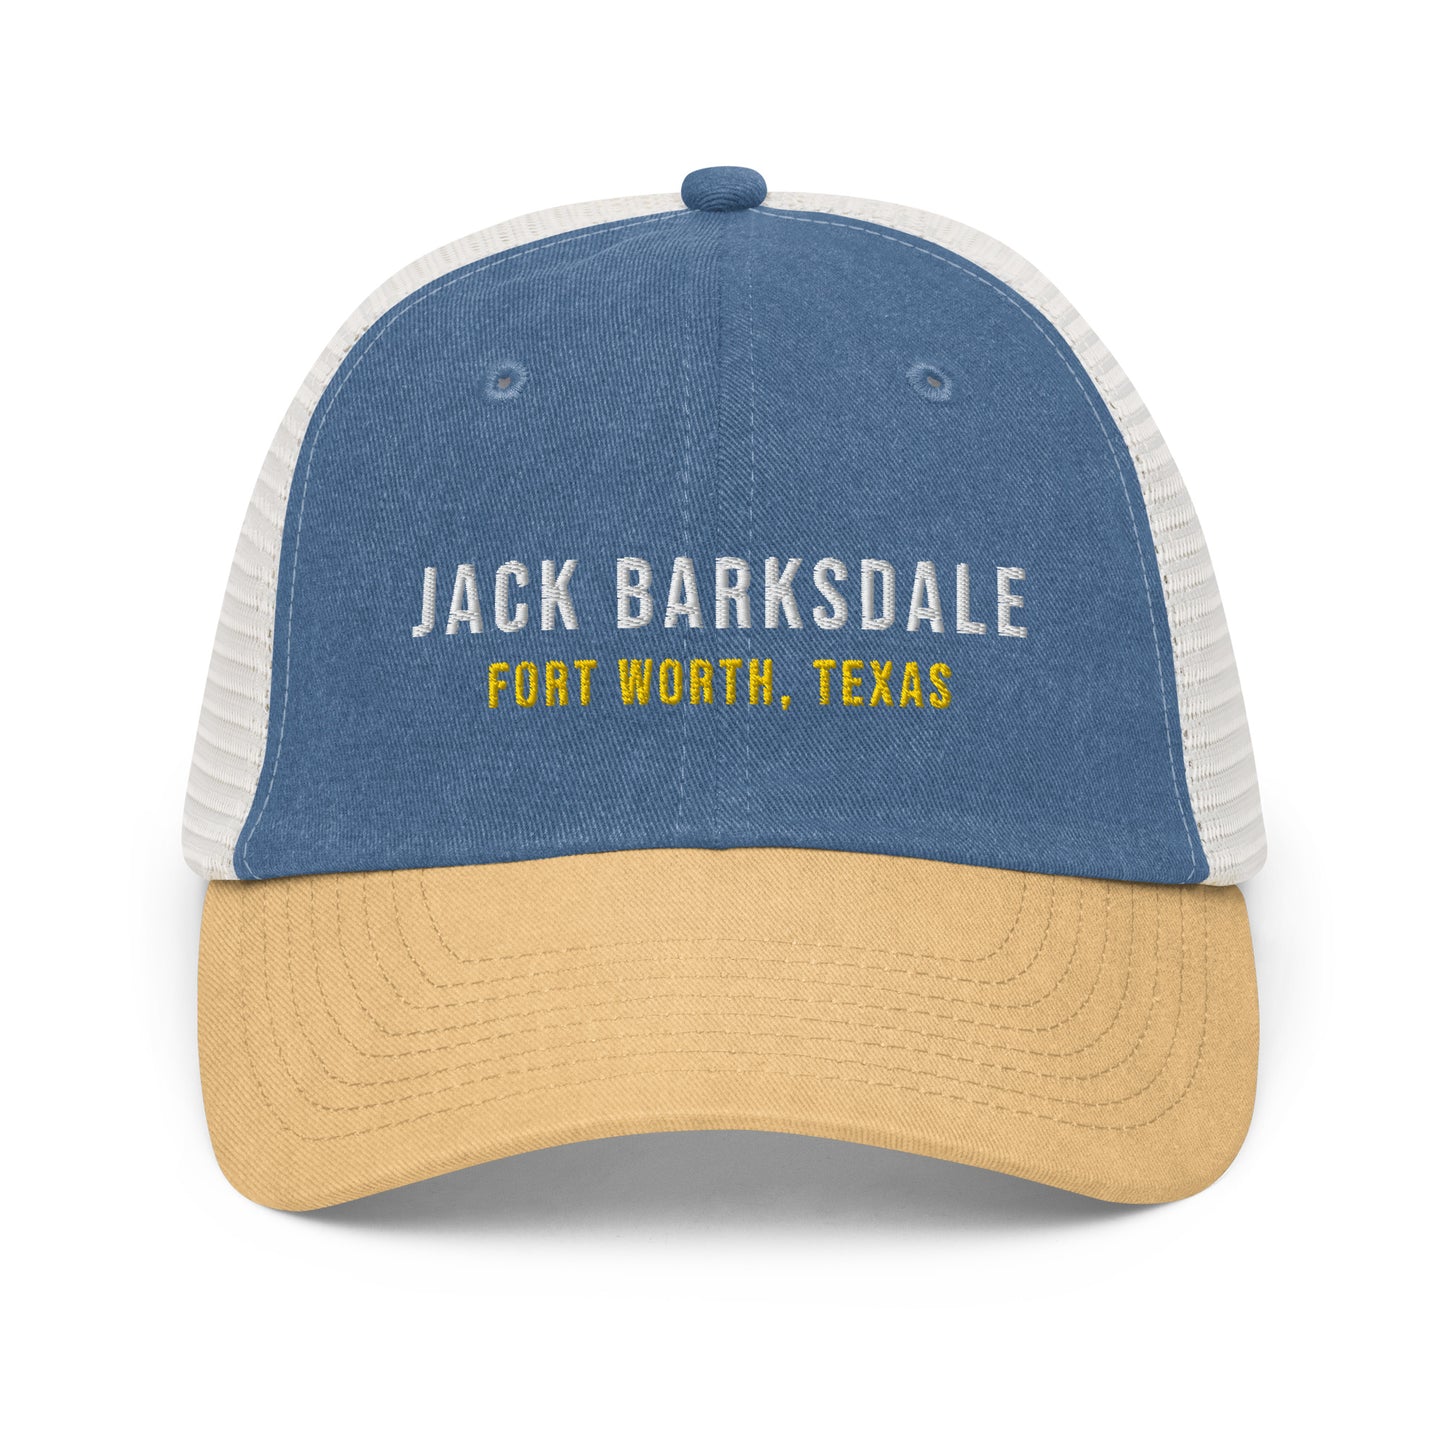 Fort Worth Two-tone cap